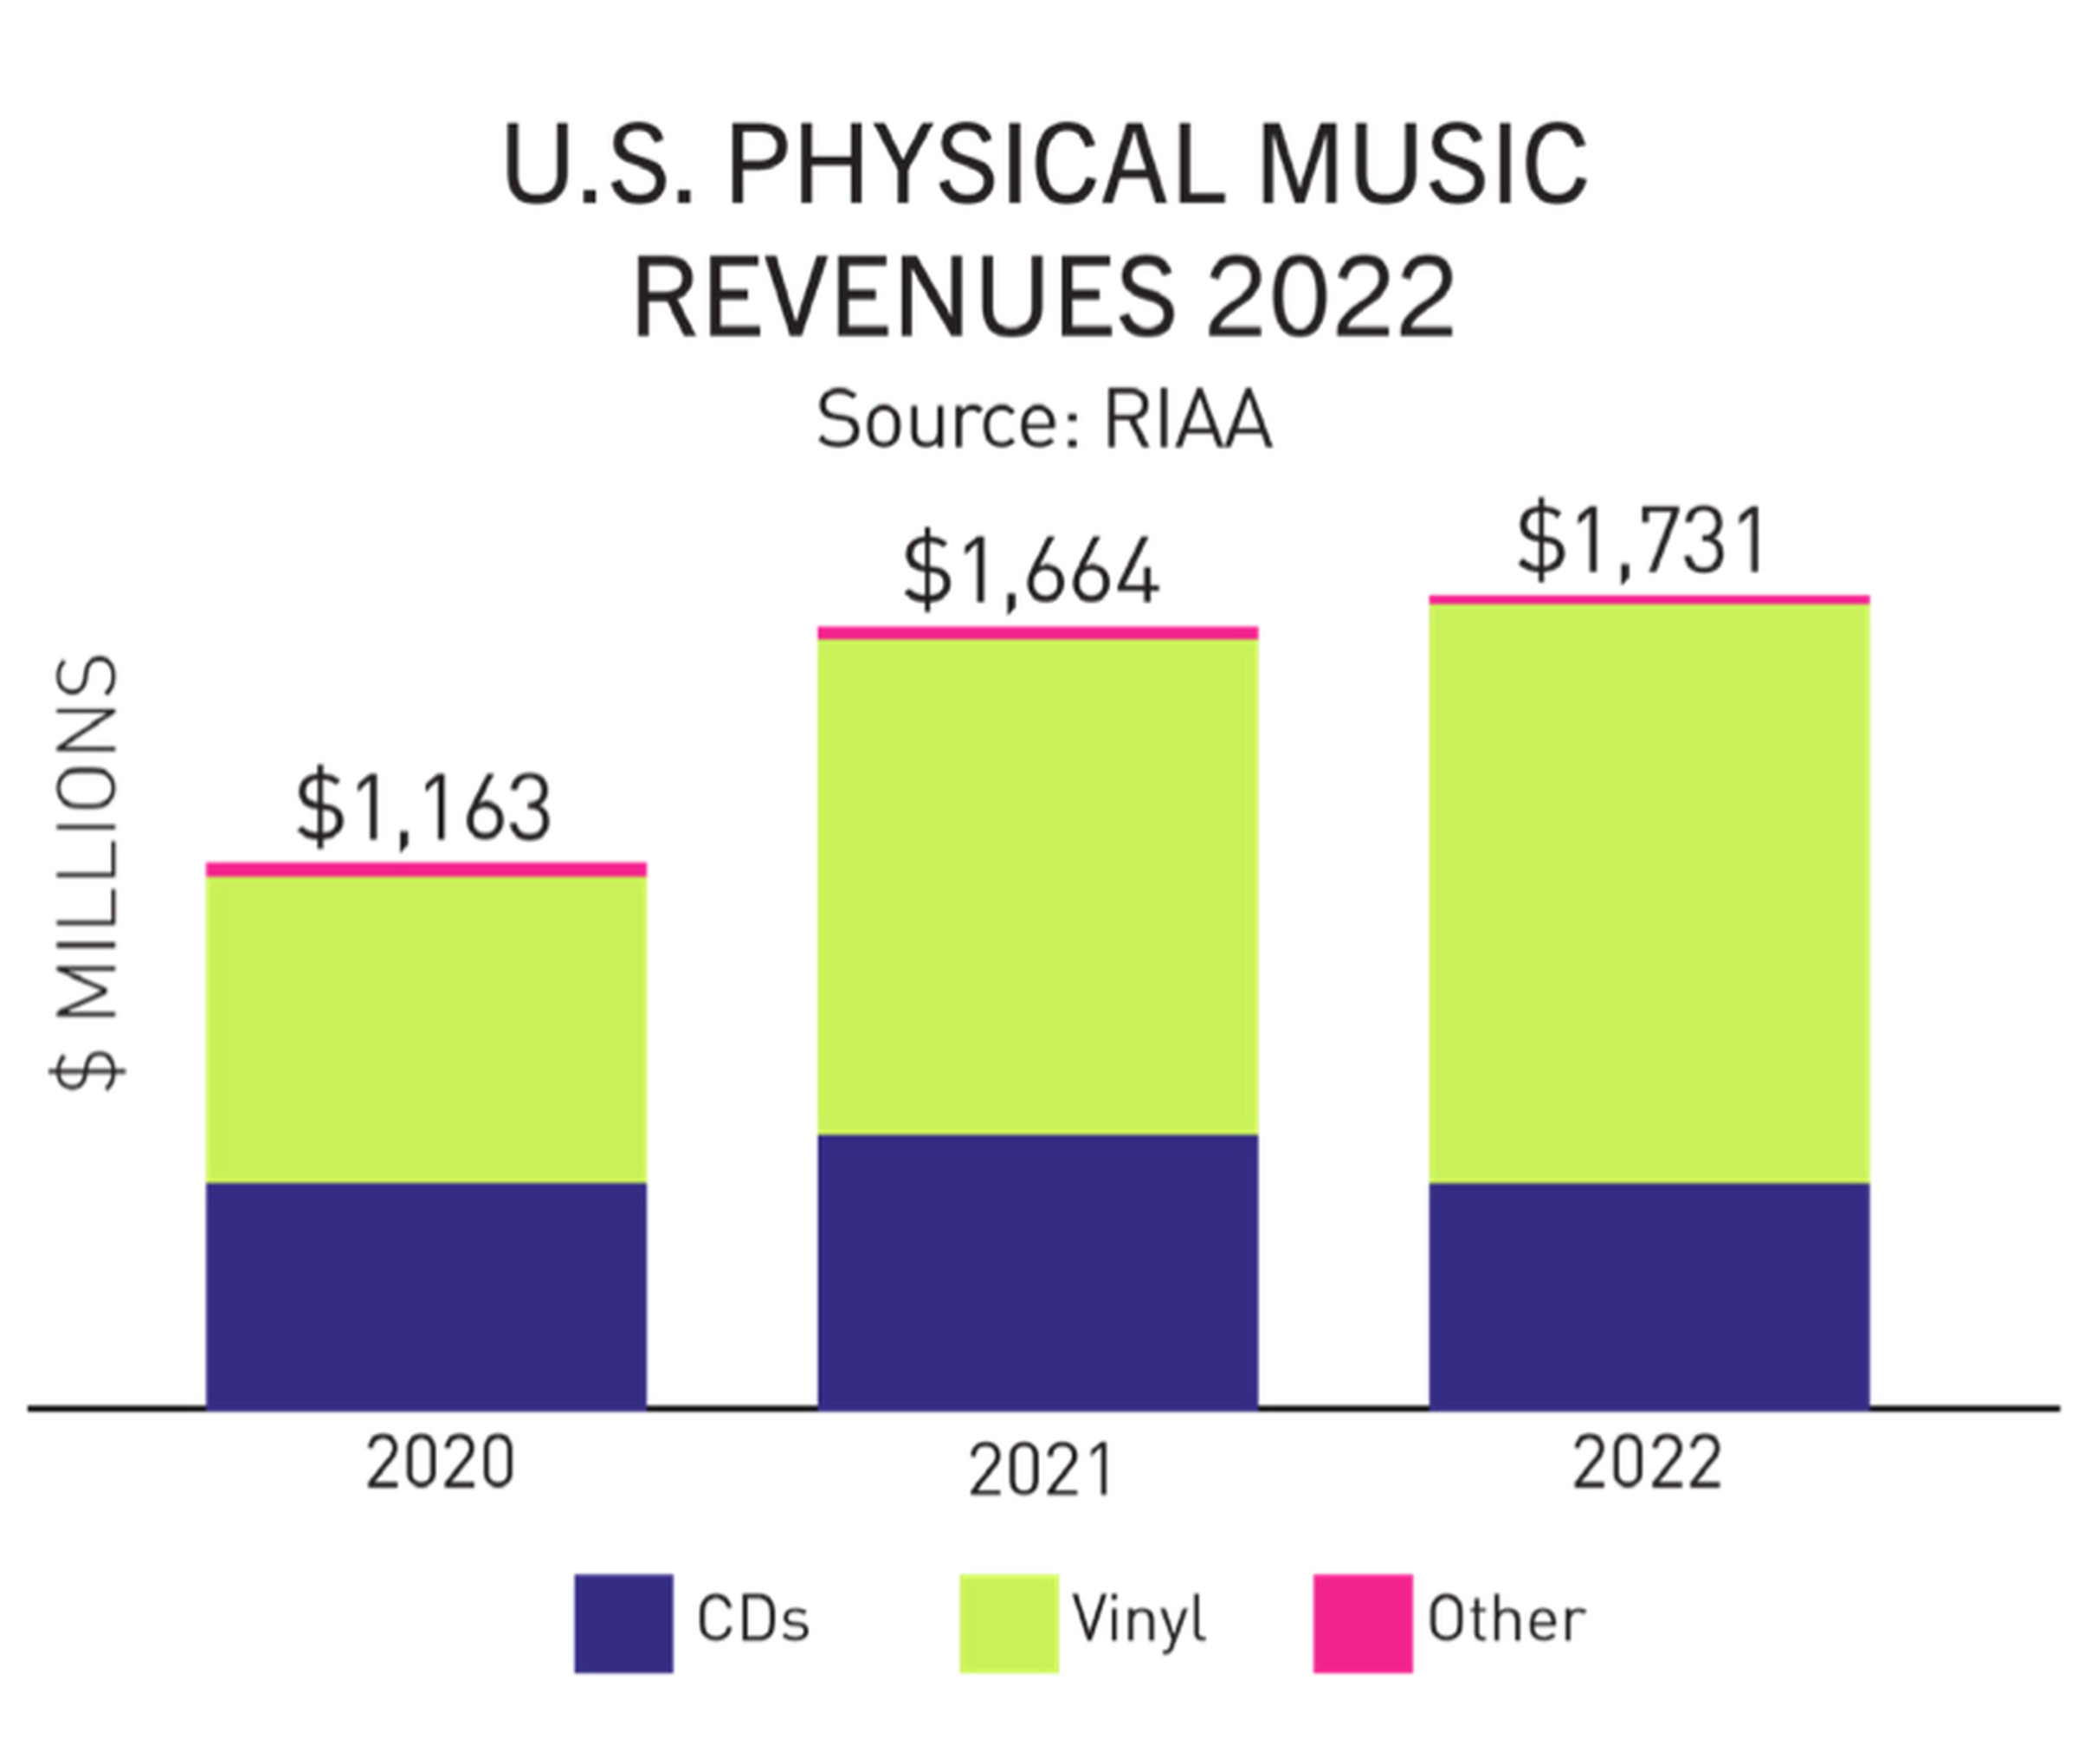 A graph displaying the revenue of physical music platforms in the US between 2020 and 2022.